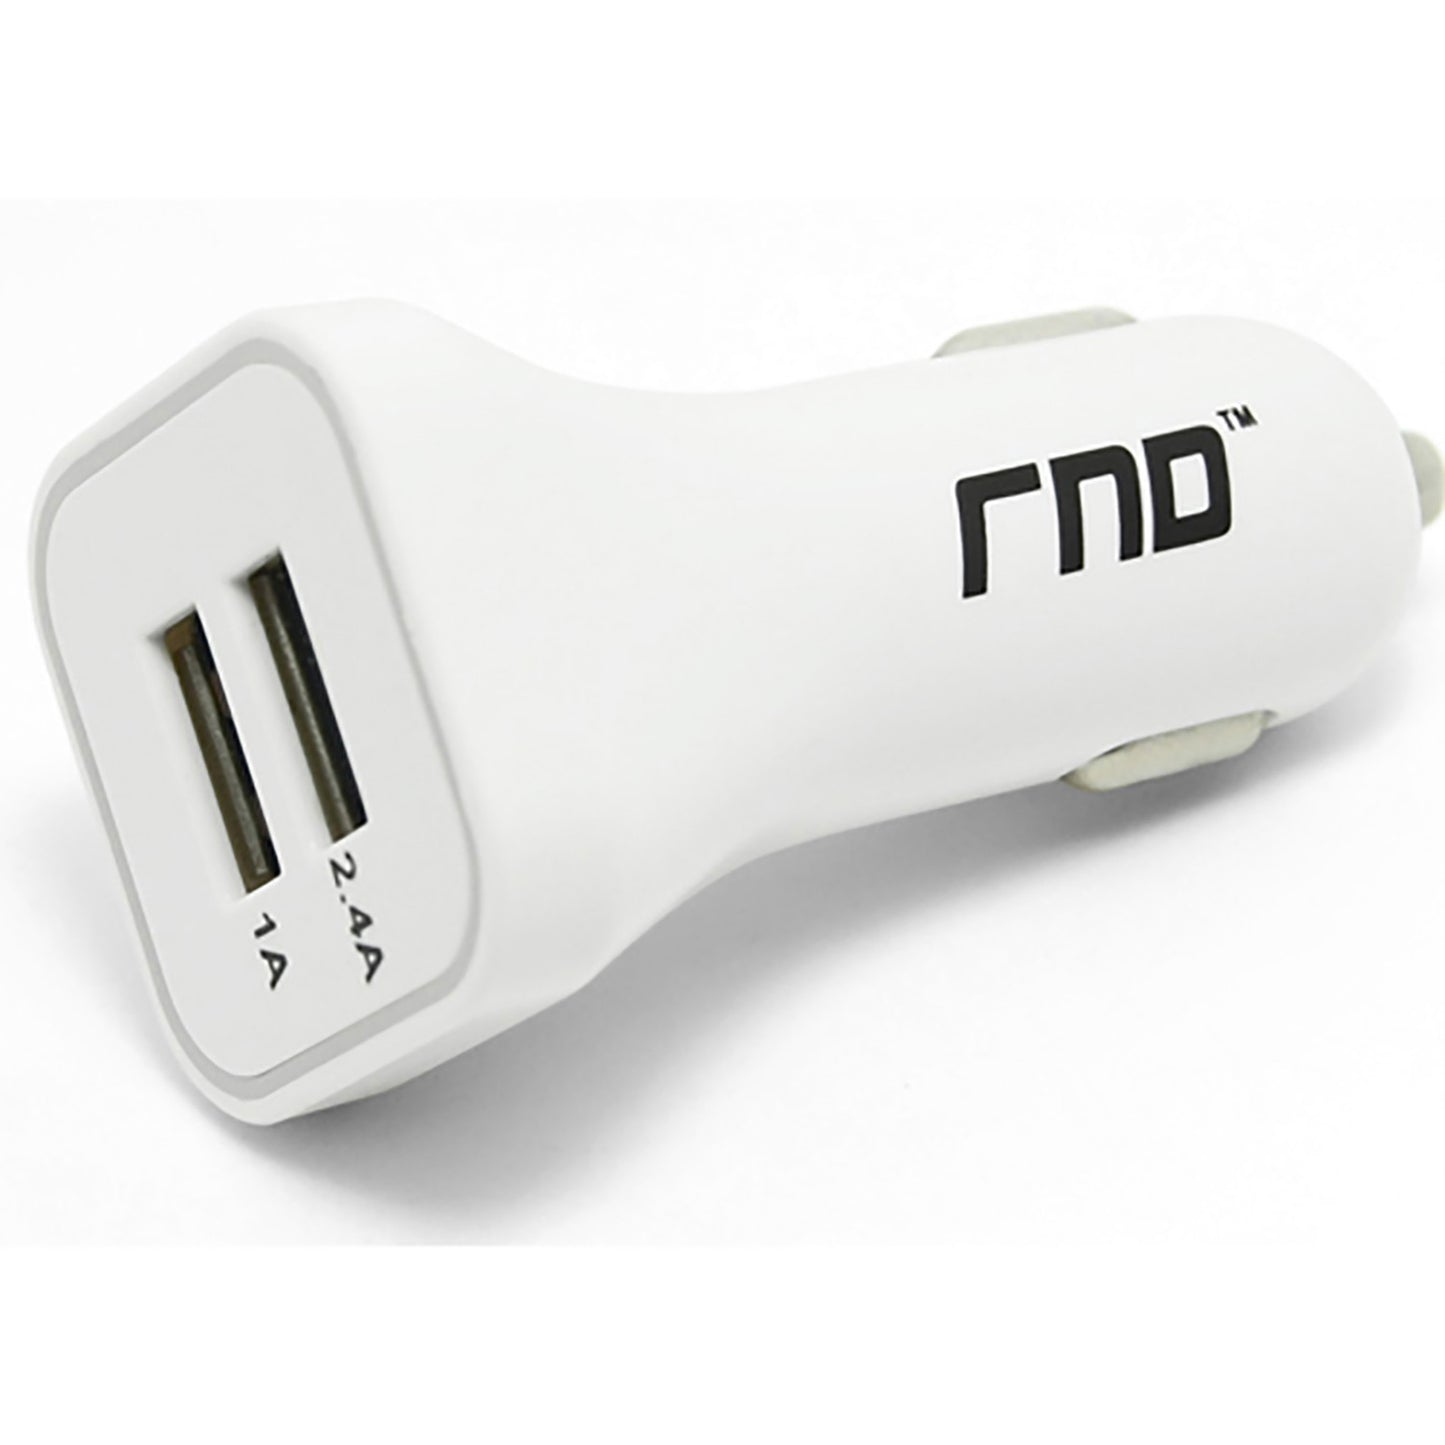 RND Dual 3.4A (fast) USB car charger for iPhones, Smartphones, iPads, Tablets, MP3 Players and Gaming Devices 